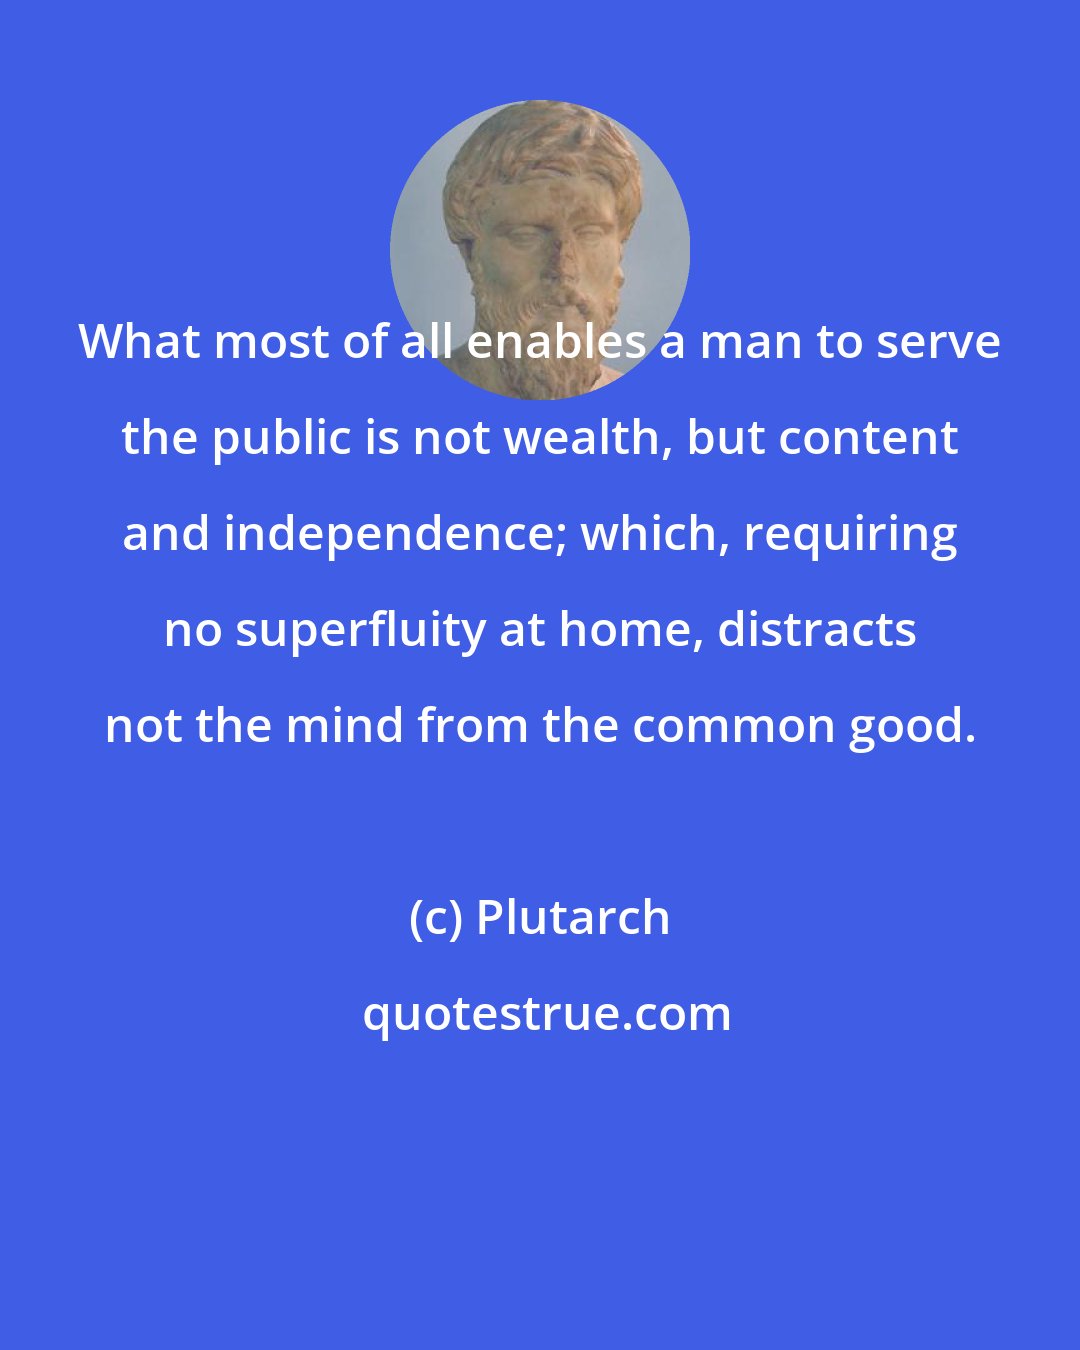 Plutarch: What most of all enables a man to serve the public is not wealth, but content and independence; which, requiring no superfluity at home, distracts not the mind from the common good.